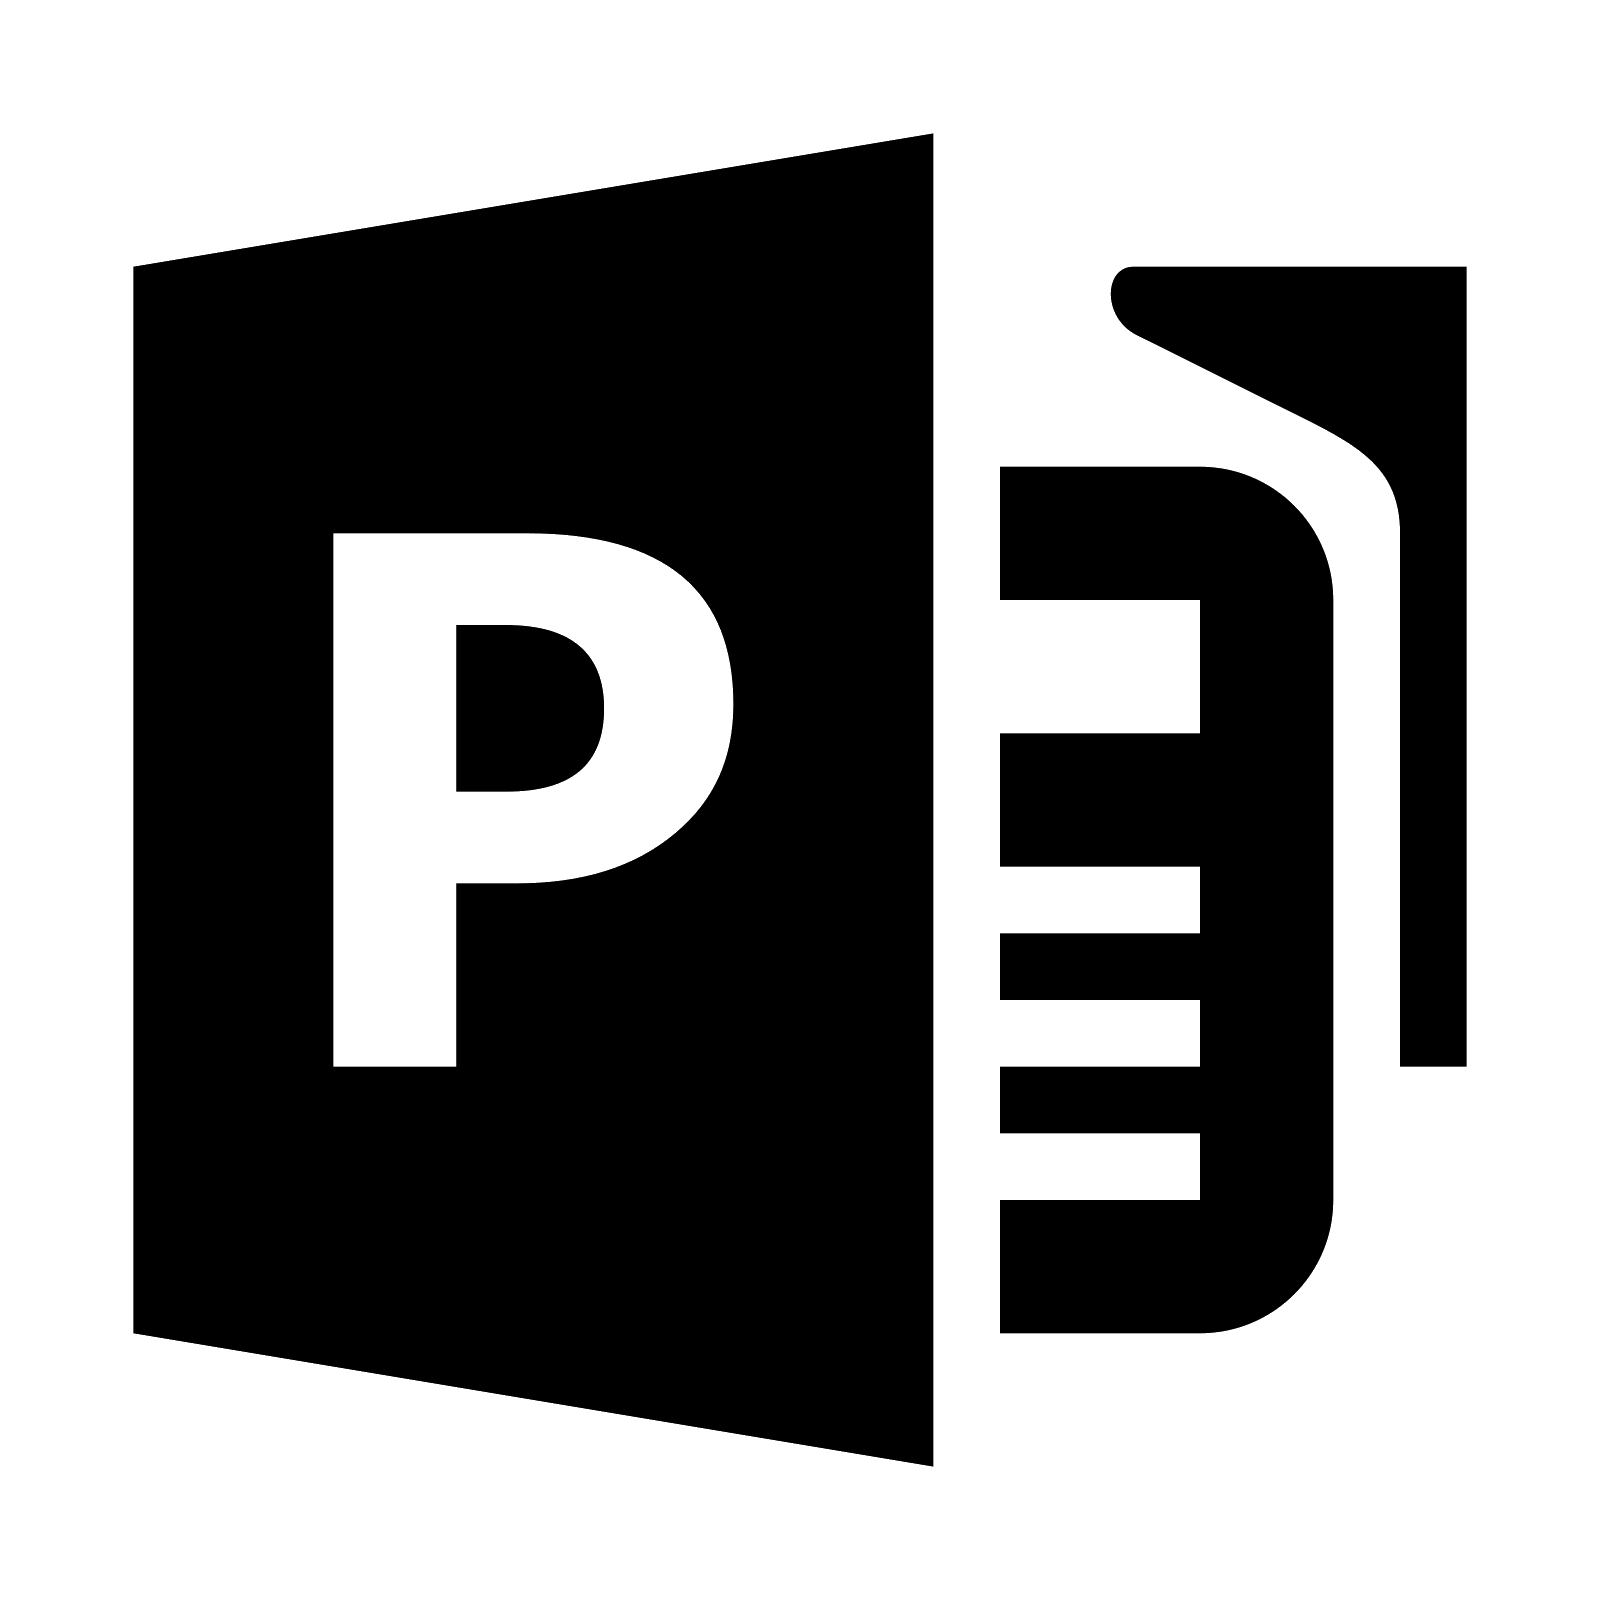 Microsoft Publisher Logo - Microsoft Publisher Icon - free download, PNG and vector